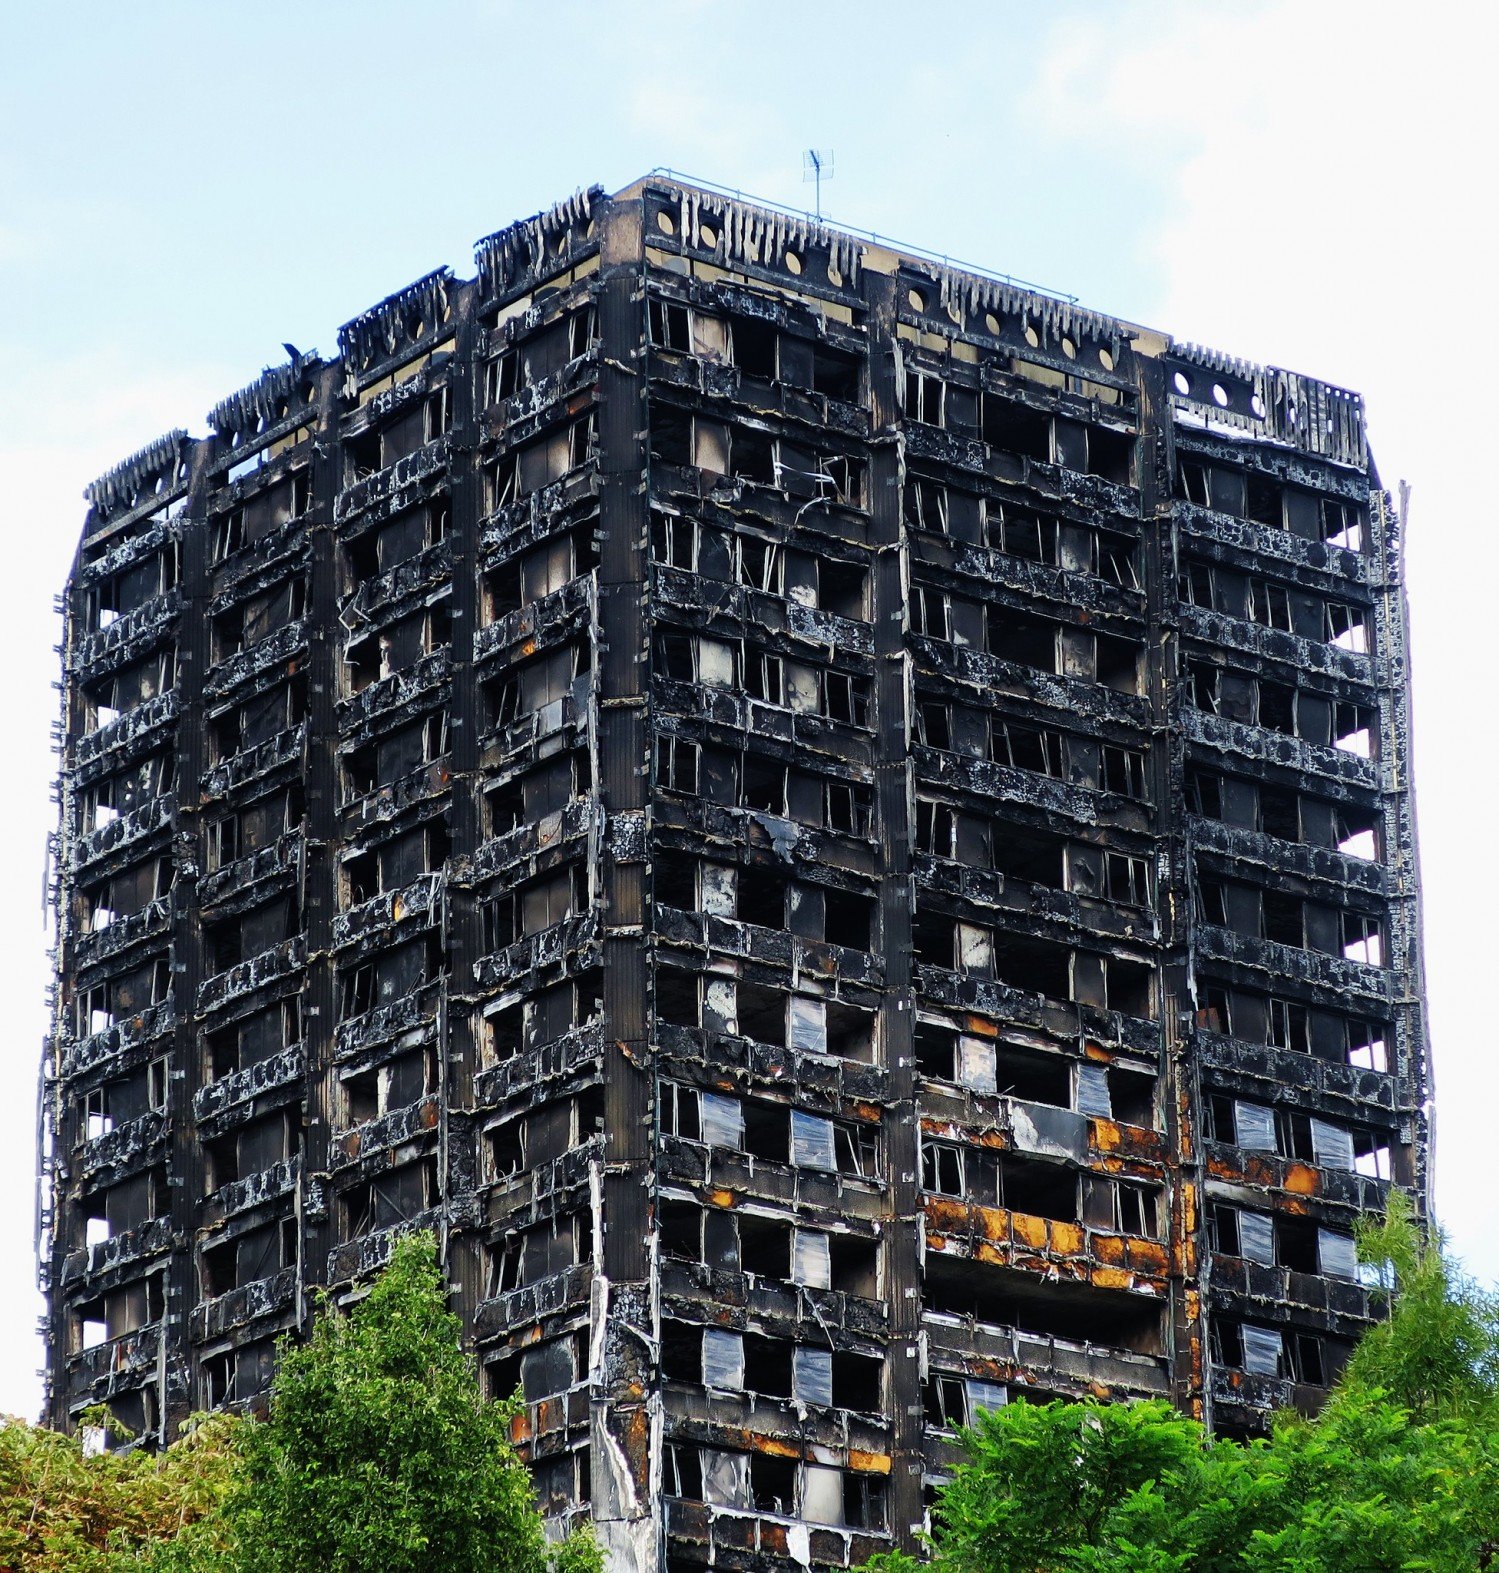 Grenfell Tower / fot. Alex JD, CC BY-NC-ND 2.0